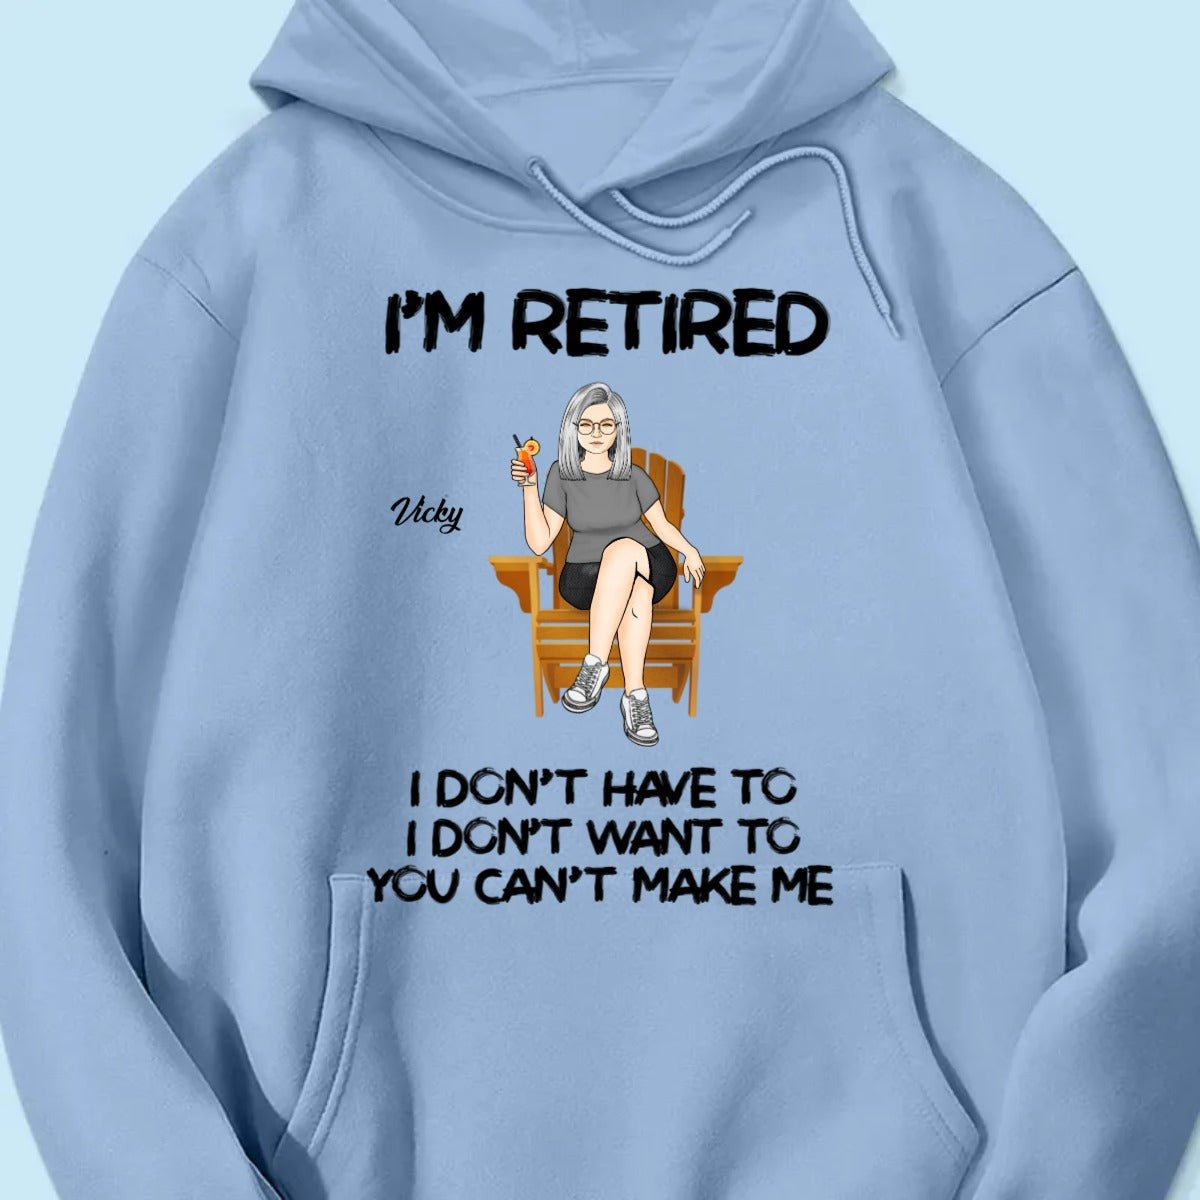 Retirement - Woman Man Sitting I‘m Retired You Can’t Make Me Retirement - Personalized Shirt - The Next Custom Gift